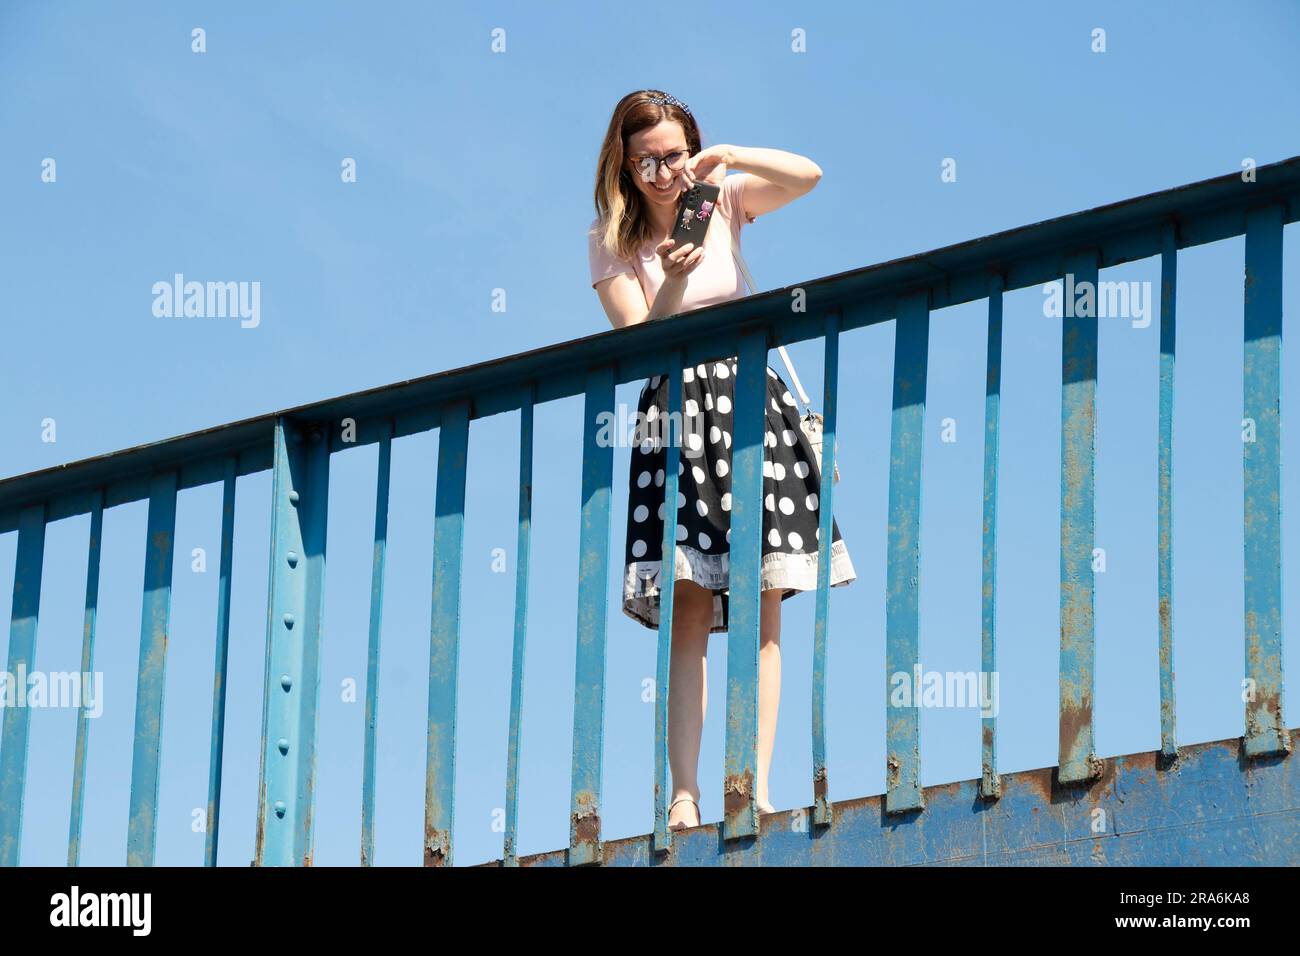 Belgrade, Serbia - June 16, 2022: One women taking photographs with cell phone while standing on a bridge, on a summer day, low angle view Stock Photo